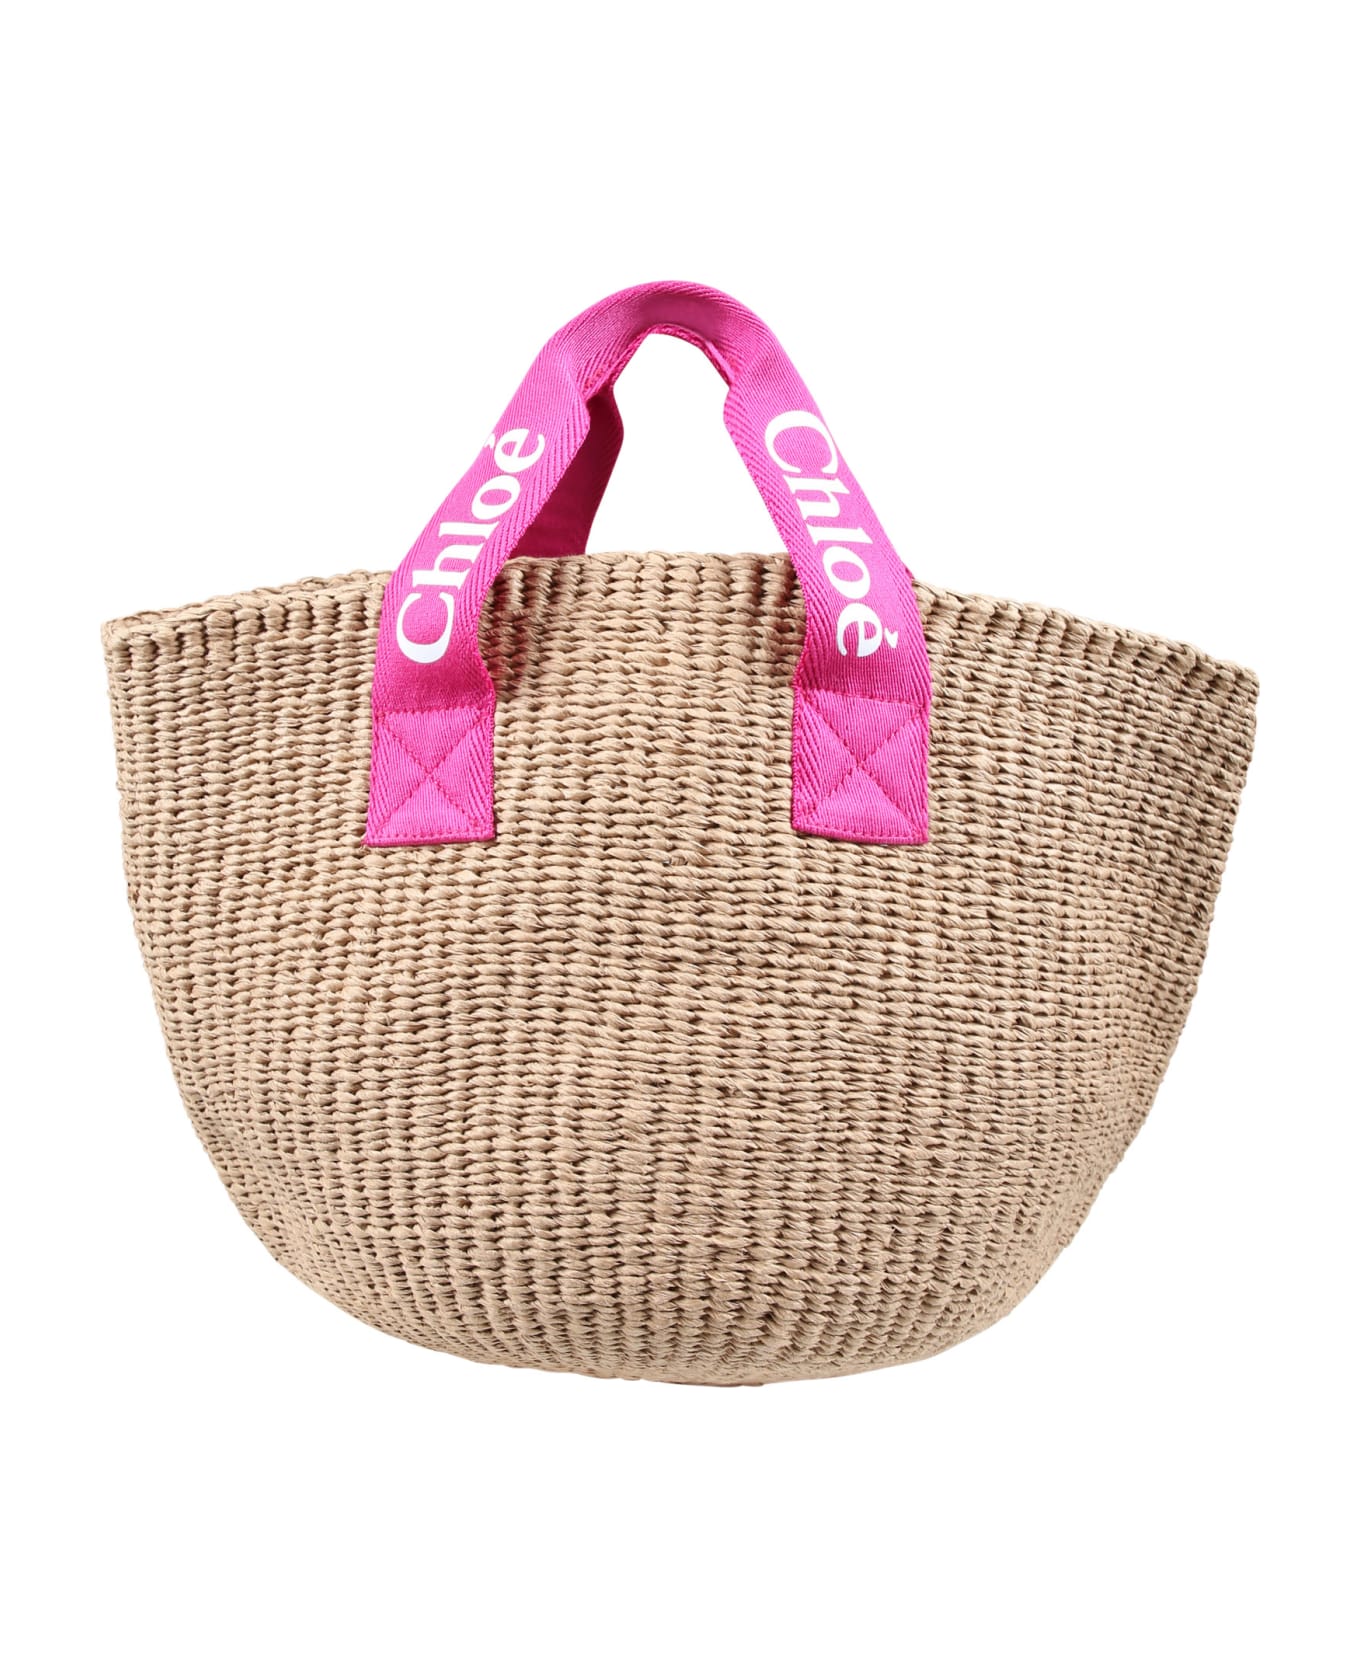 Chloé Casual Beige Straw Bag For Girl - Beige アクセサリー＆ギフト